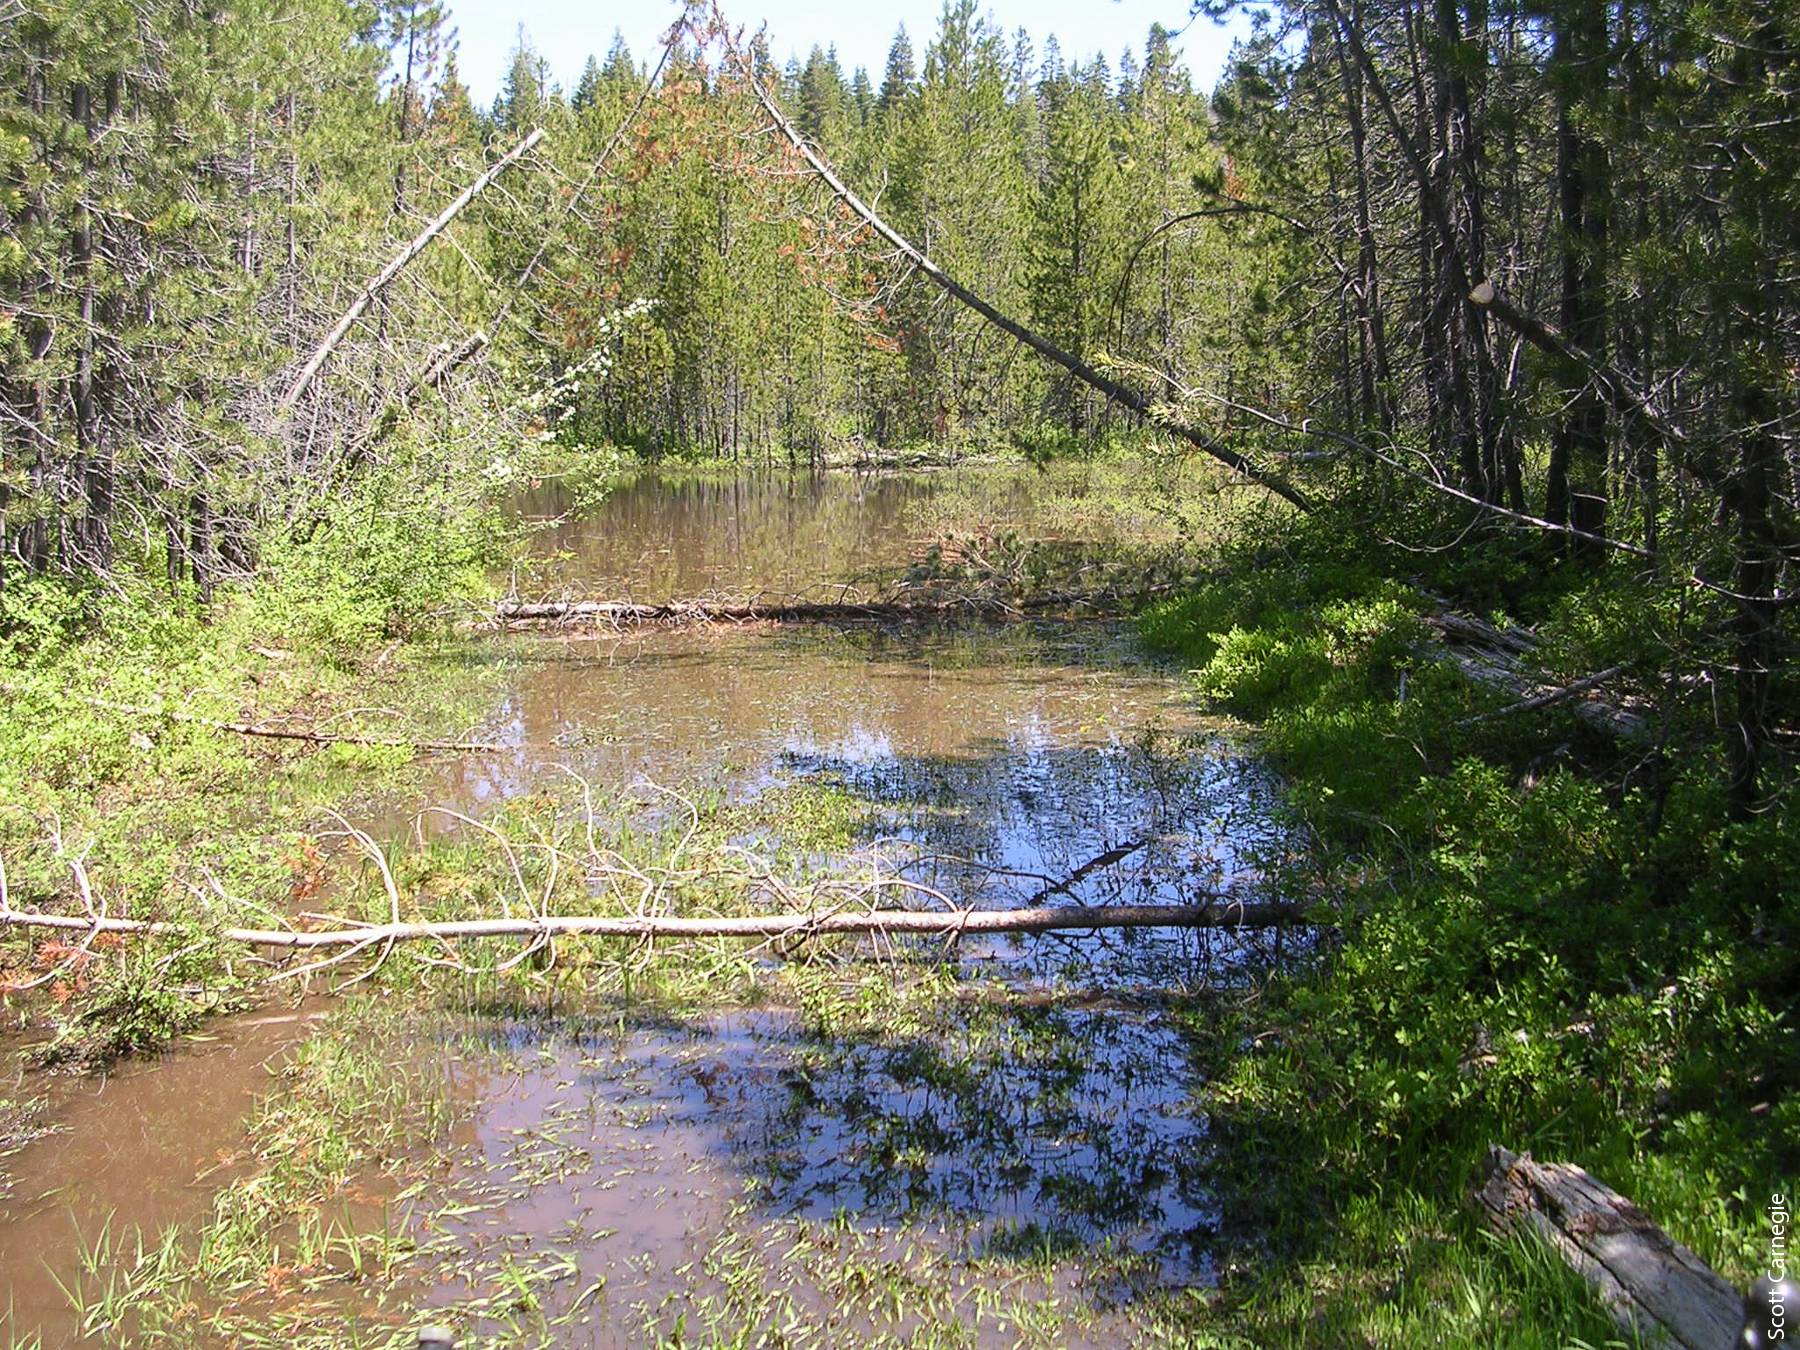 Riparian area with lodgepole pine.